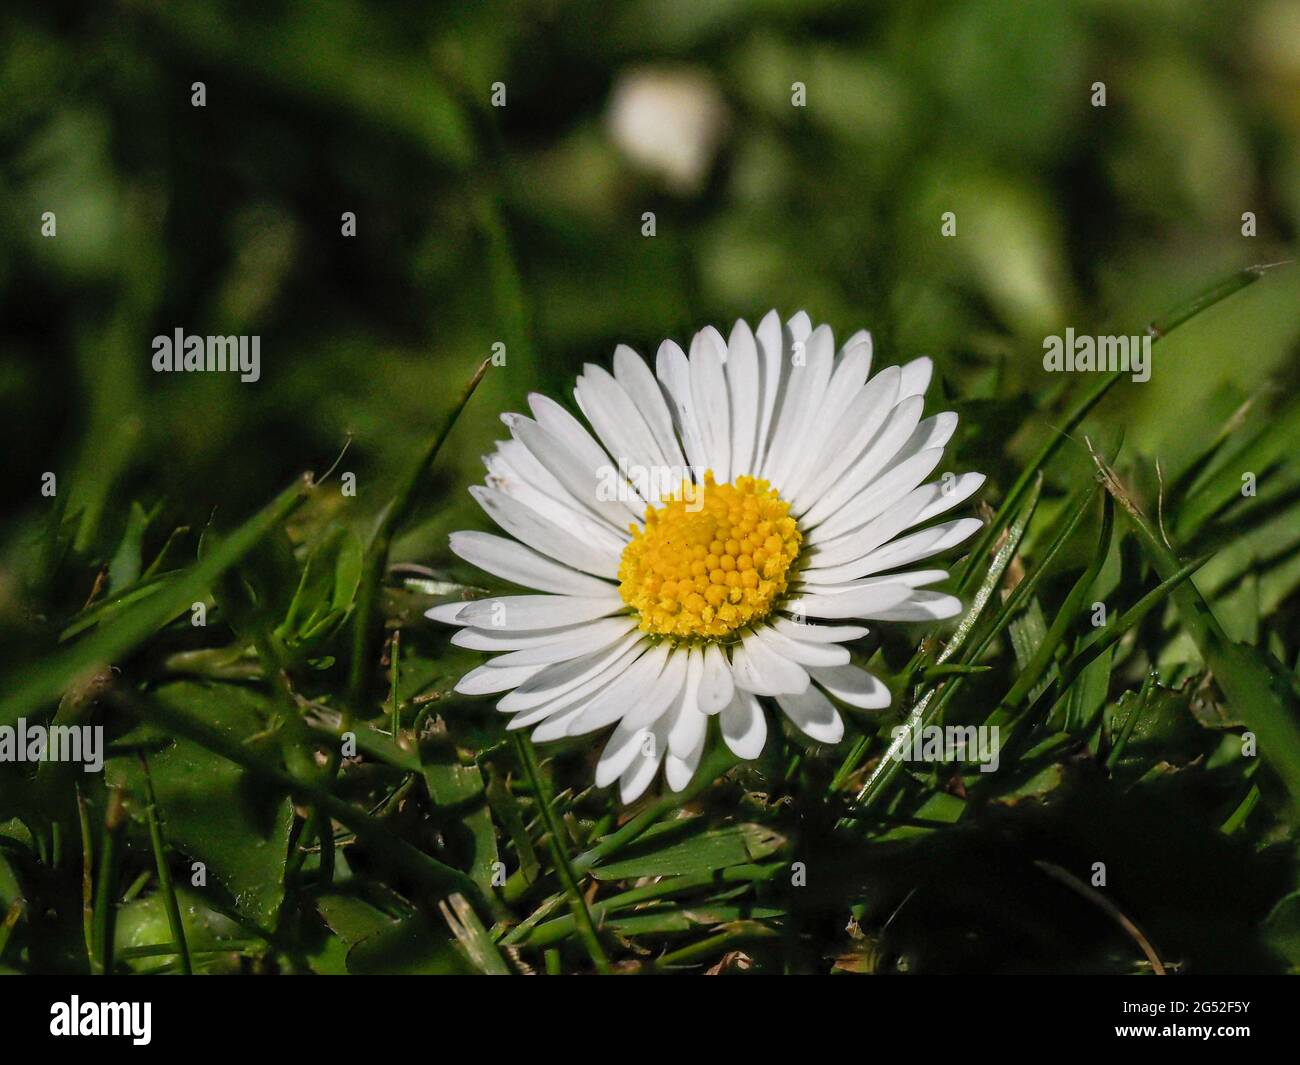 A close up of a single white and yellow flower of the common lawn daisy Bellis perennis Stock Photo